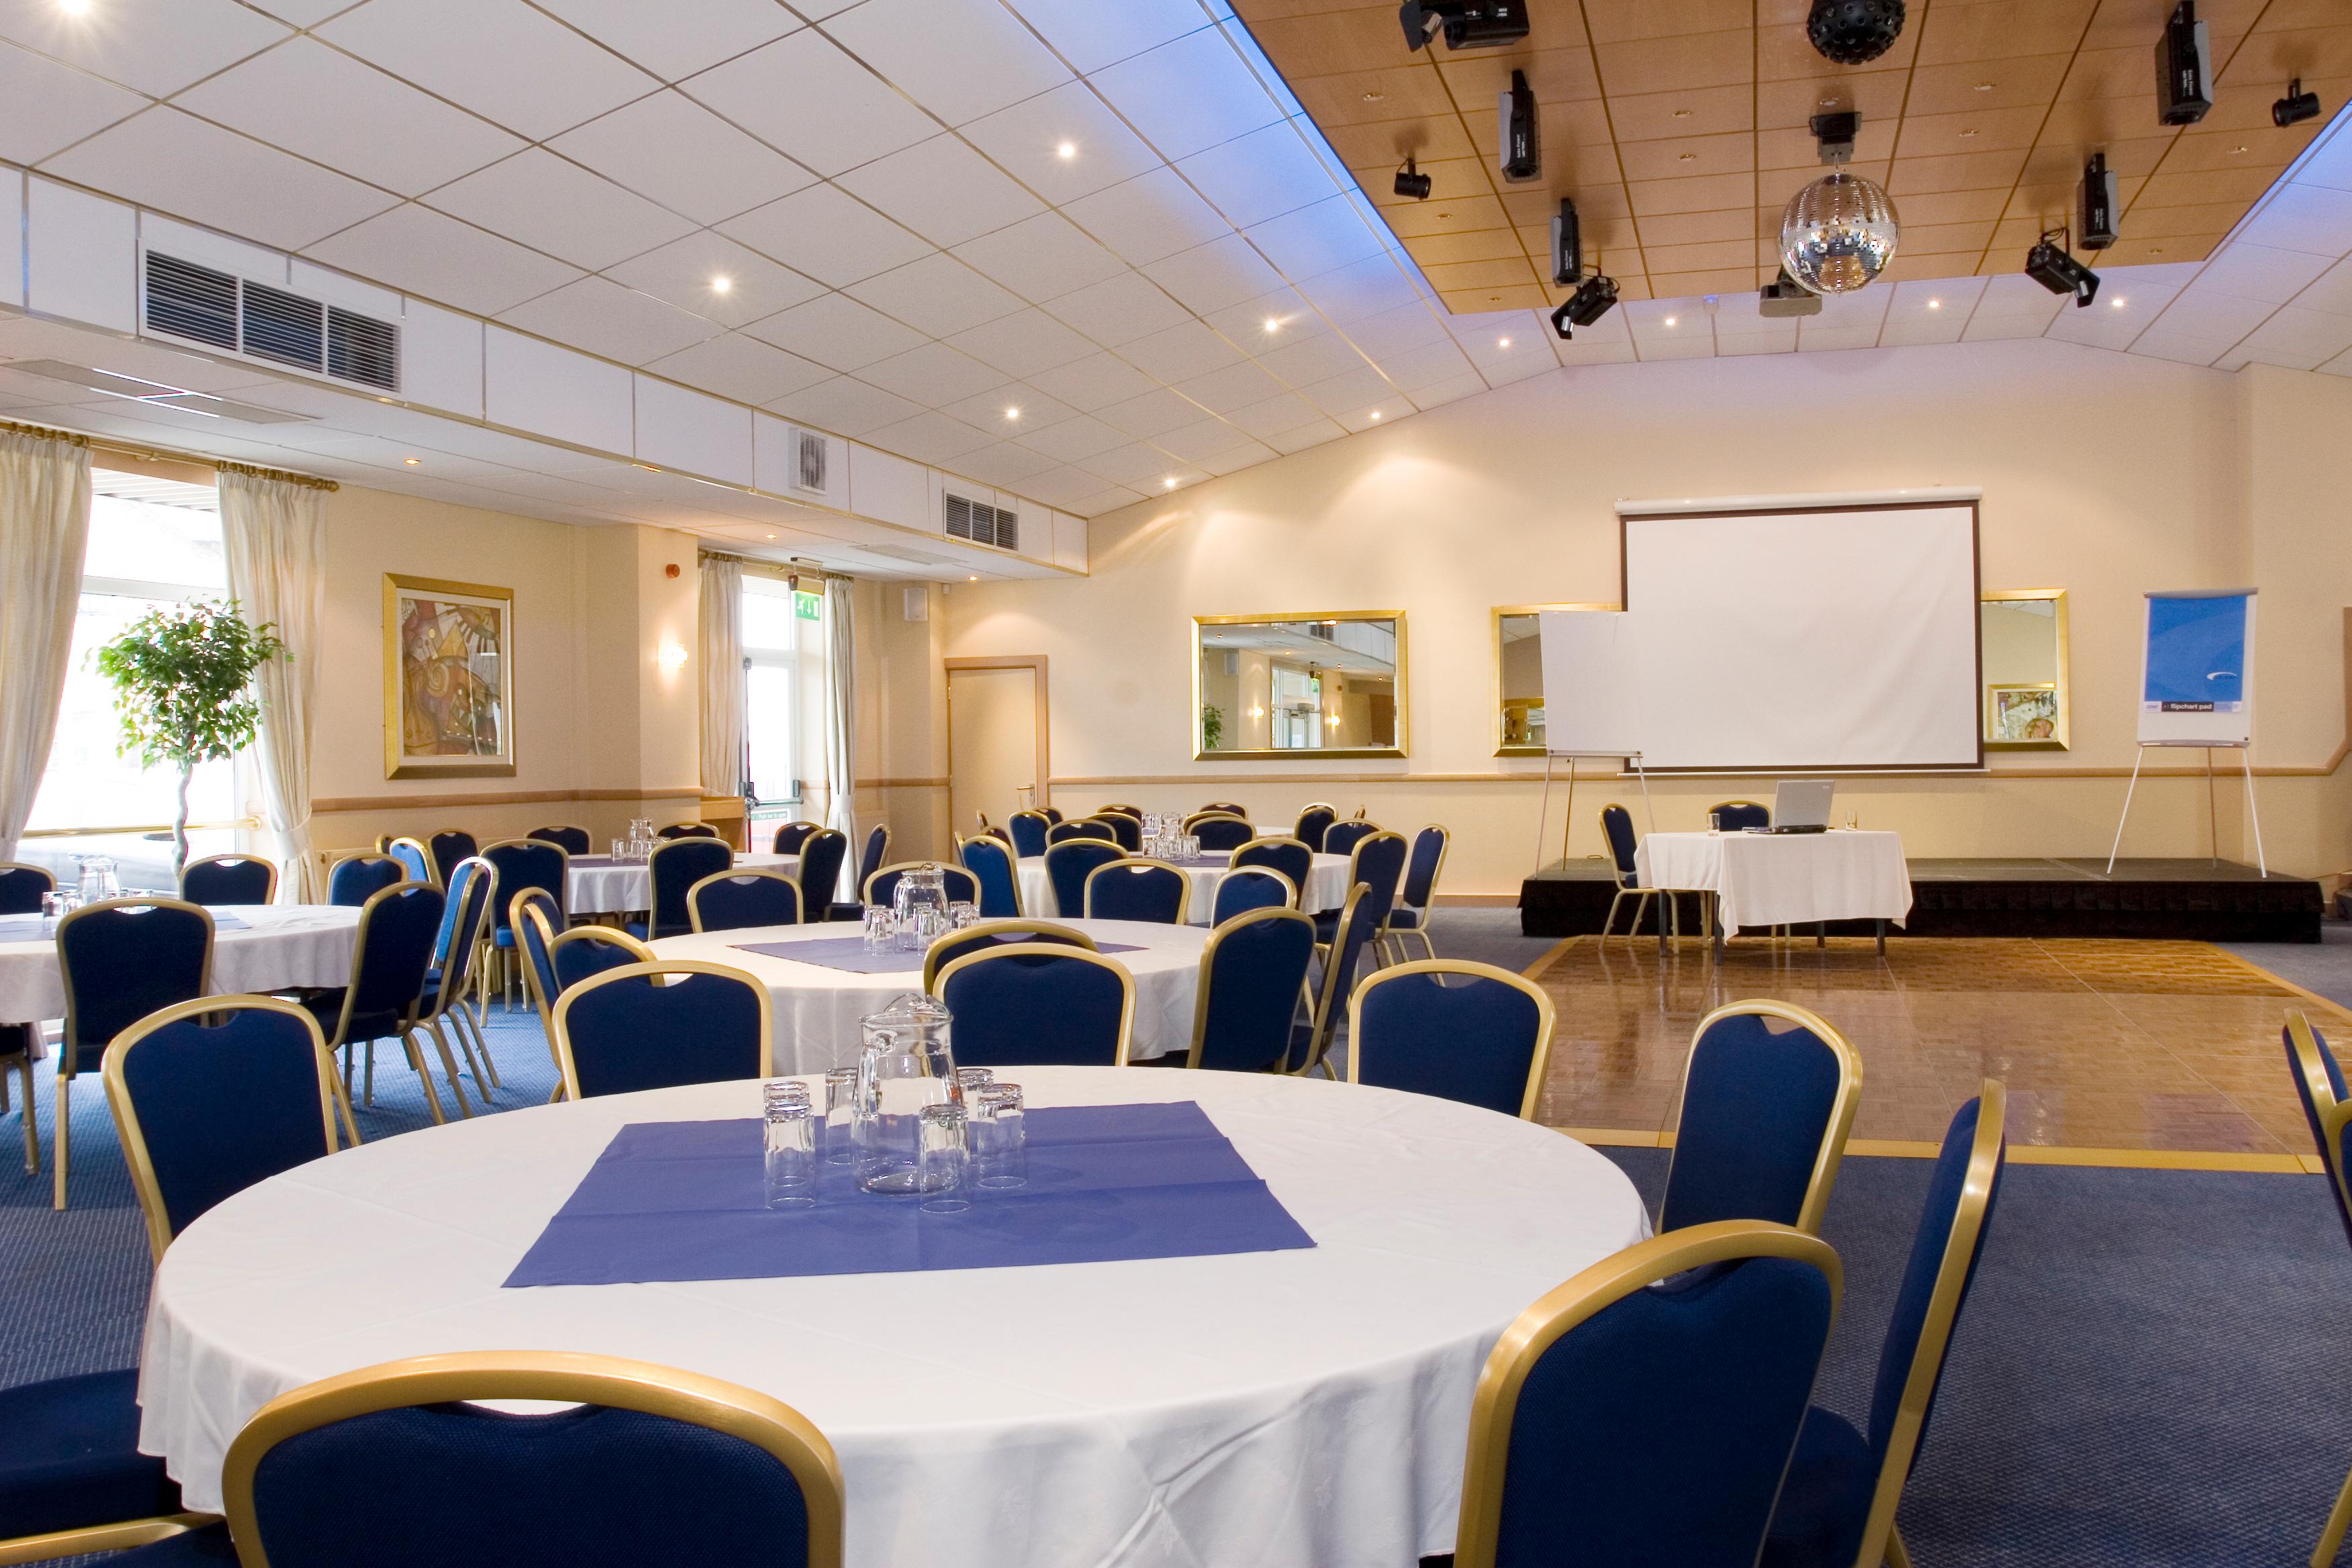 The Fairway And Bluebell Banqueting Suite, Bluebell Banqueting Suite photo #1